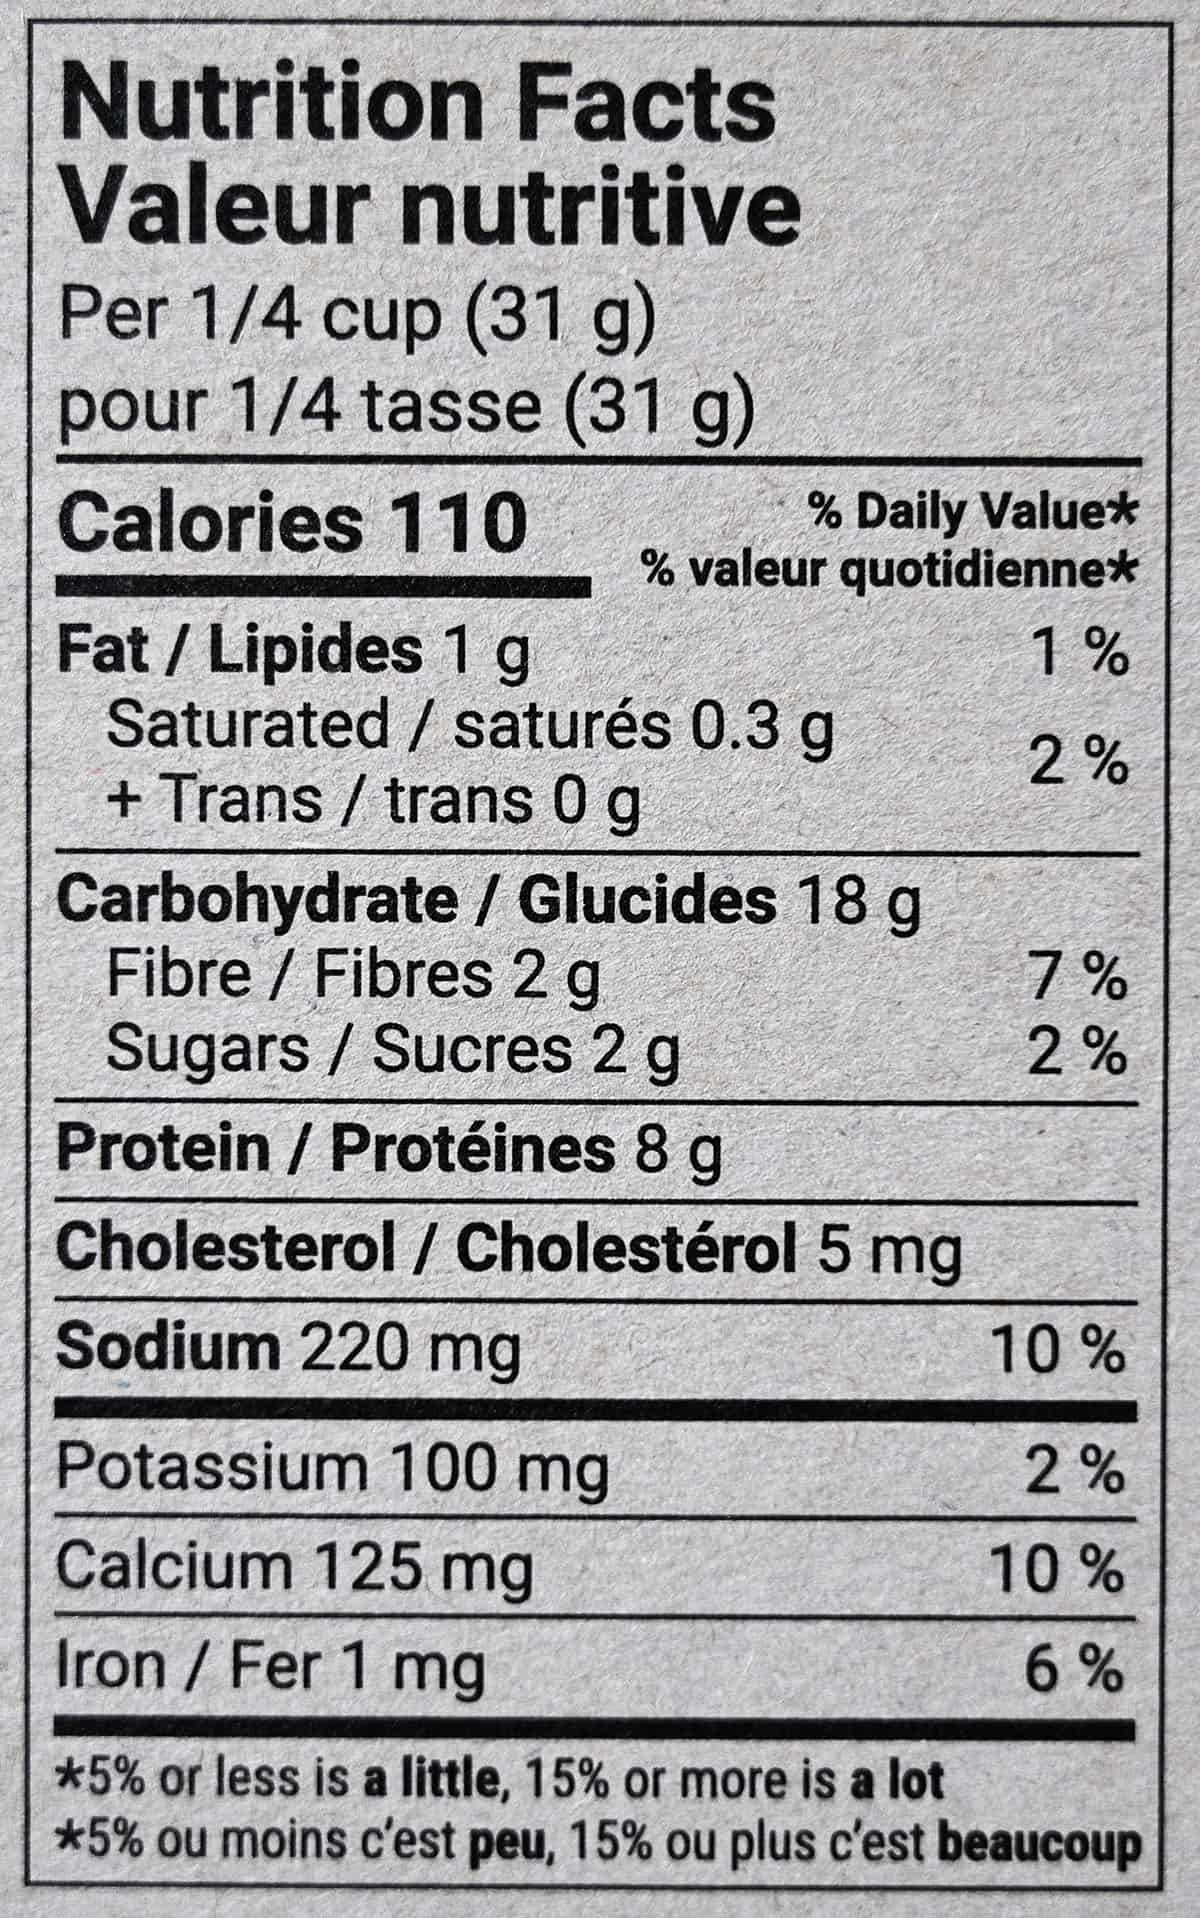 Image of the Kodiak Power Cakes nutrition facts from the back of the box.